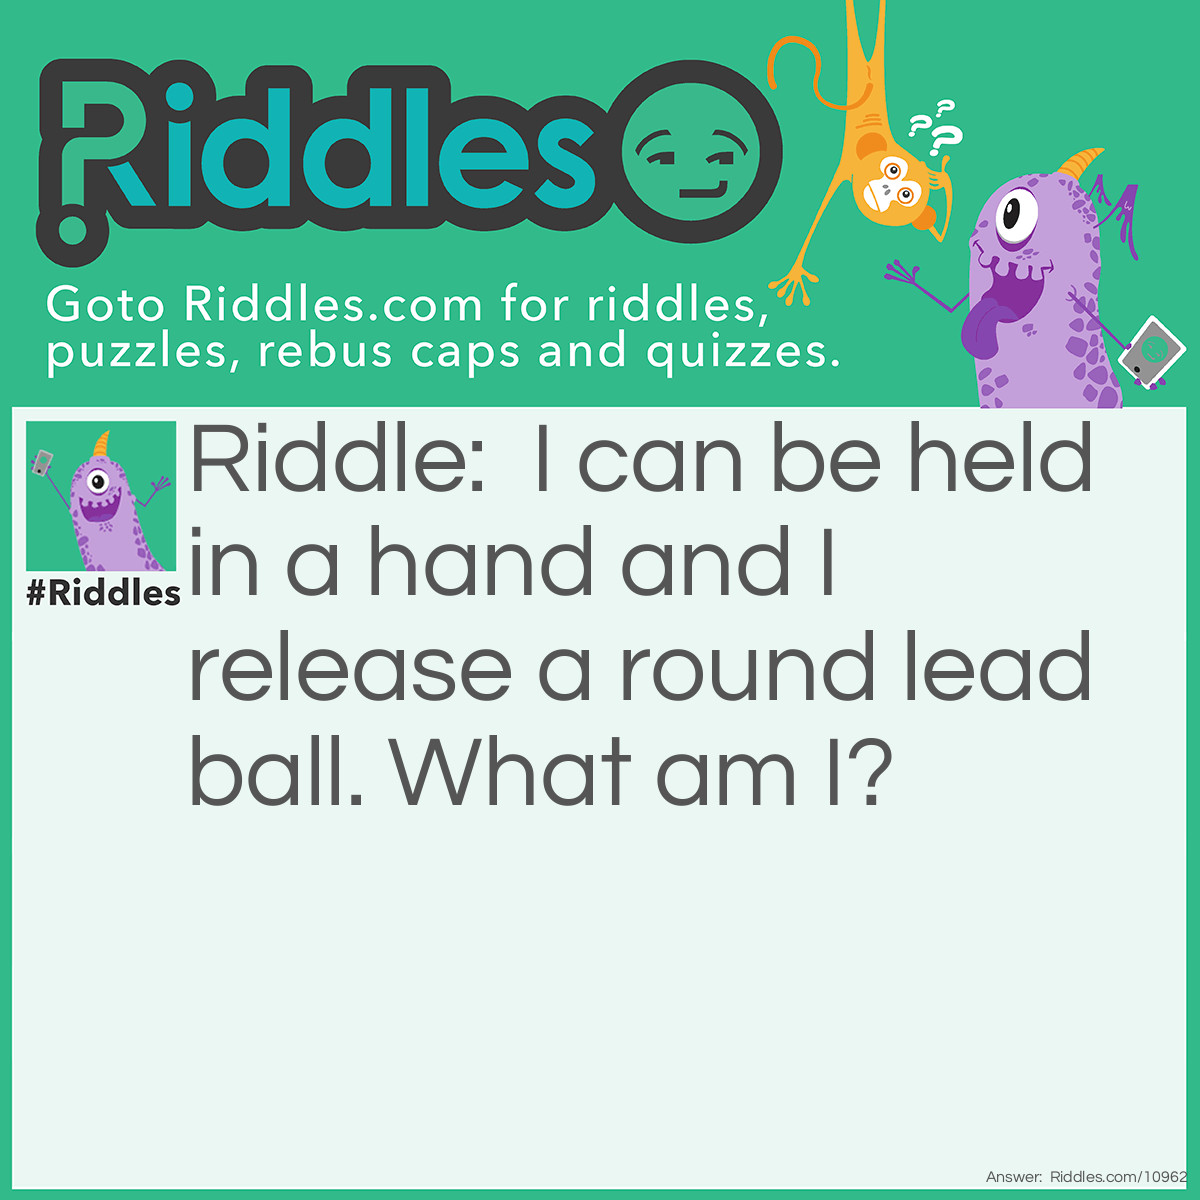 Riddle: I can be held in a hand and I release a round lead ball. What am I? Answer: Flintlock.